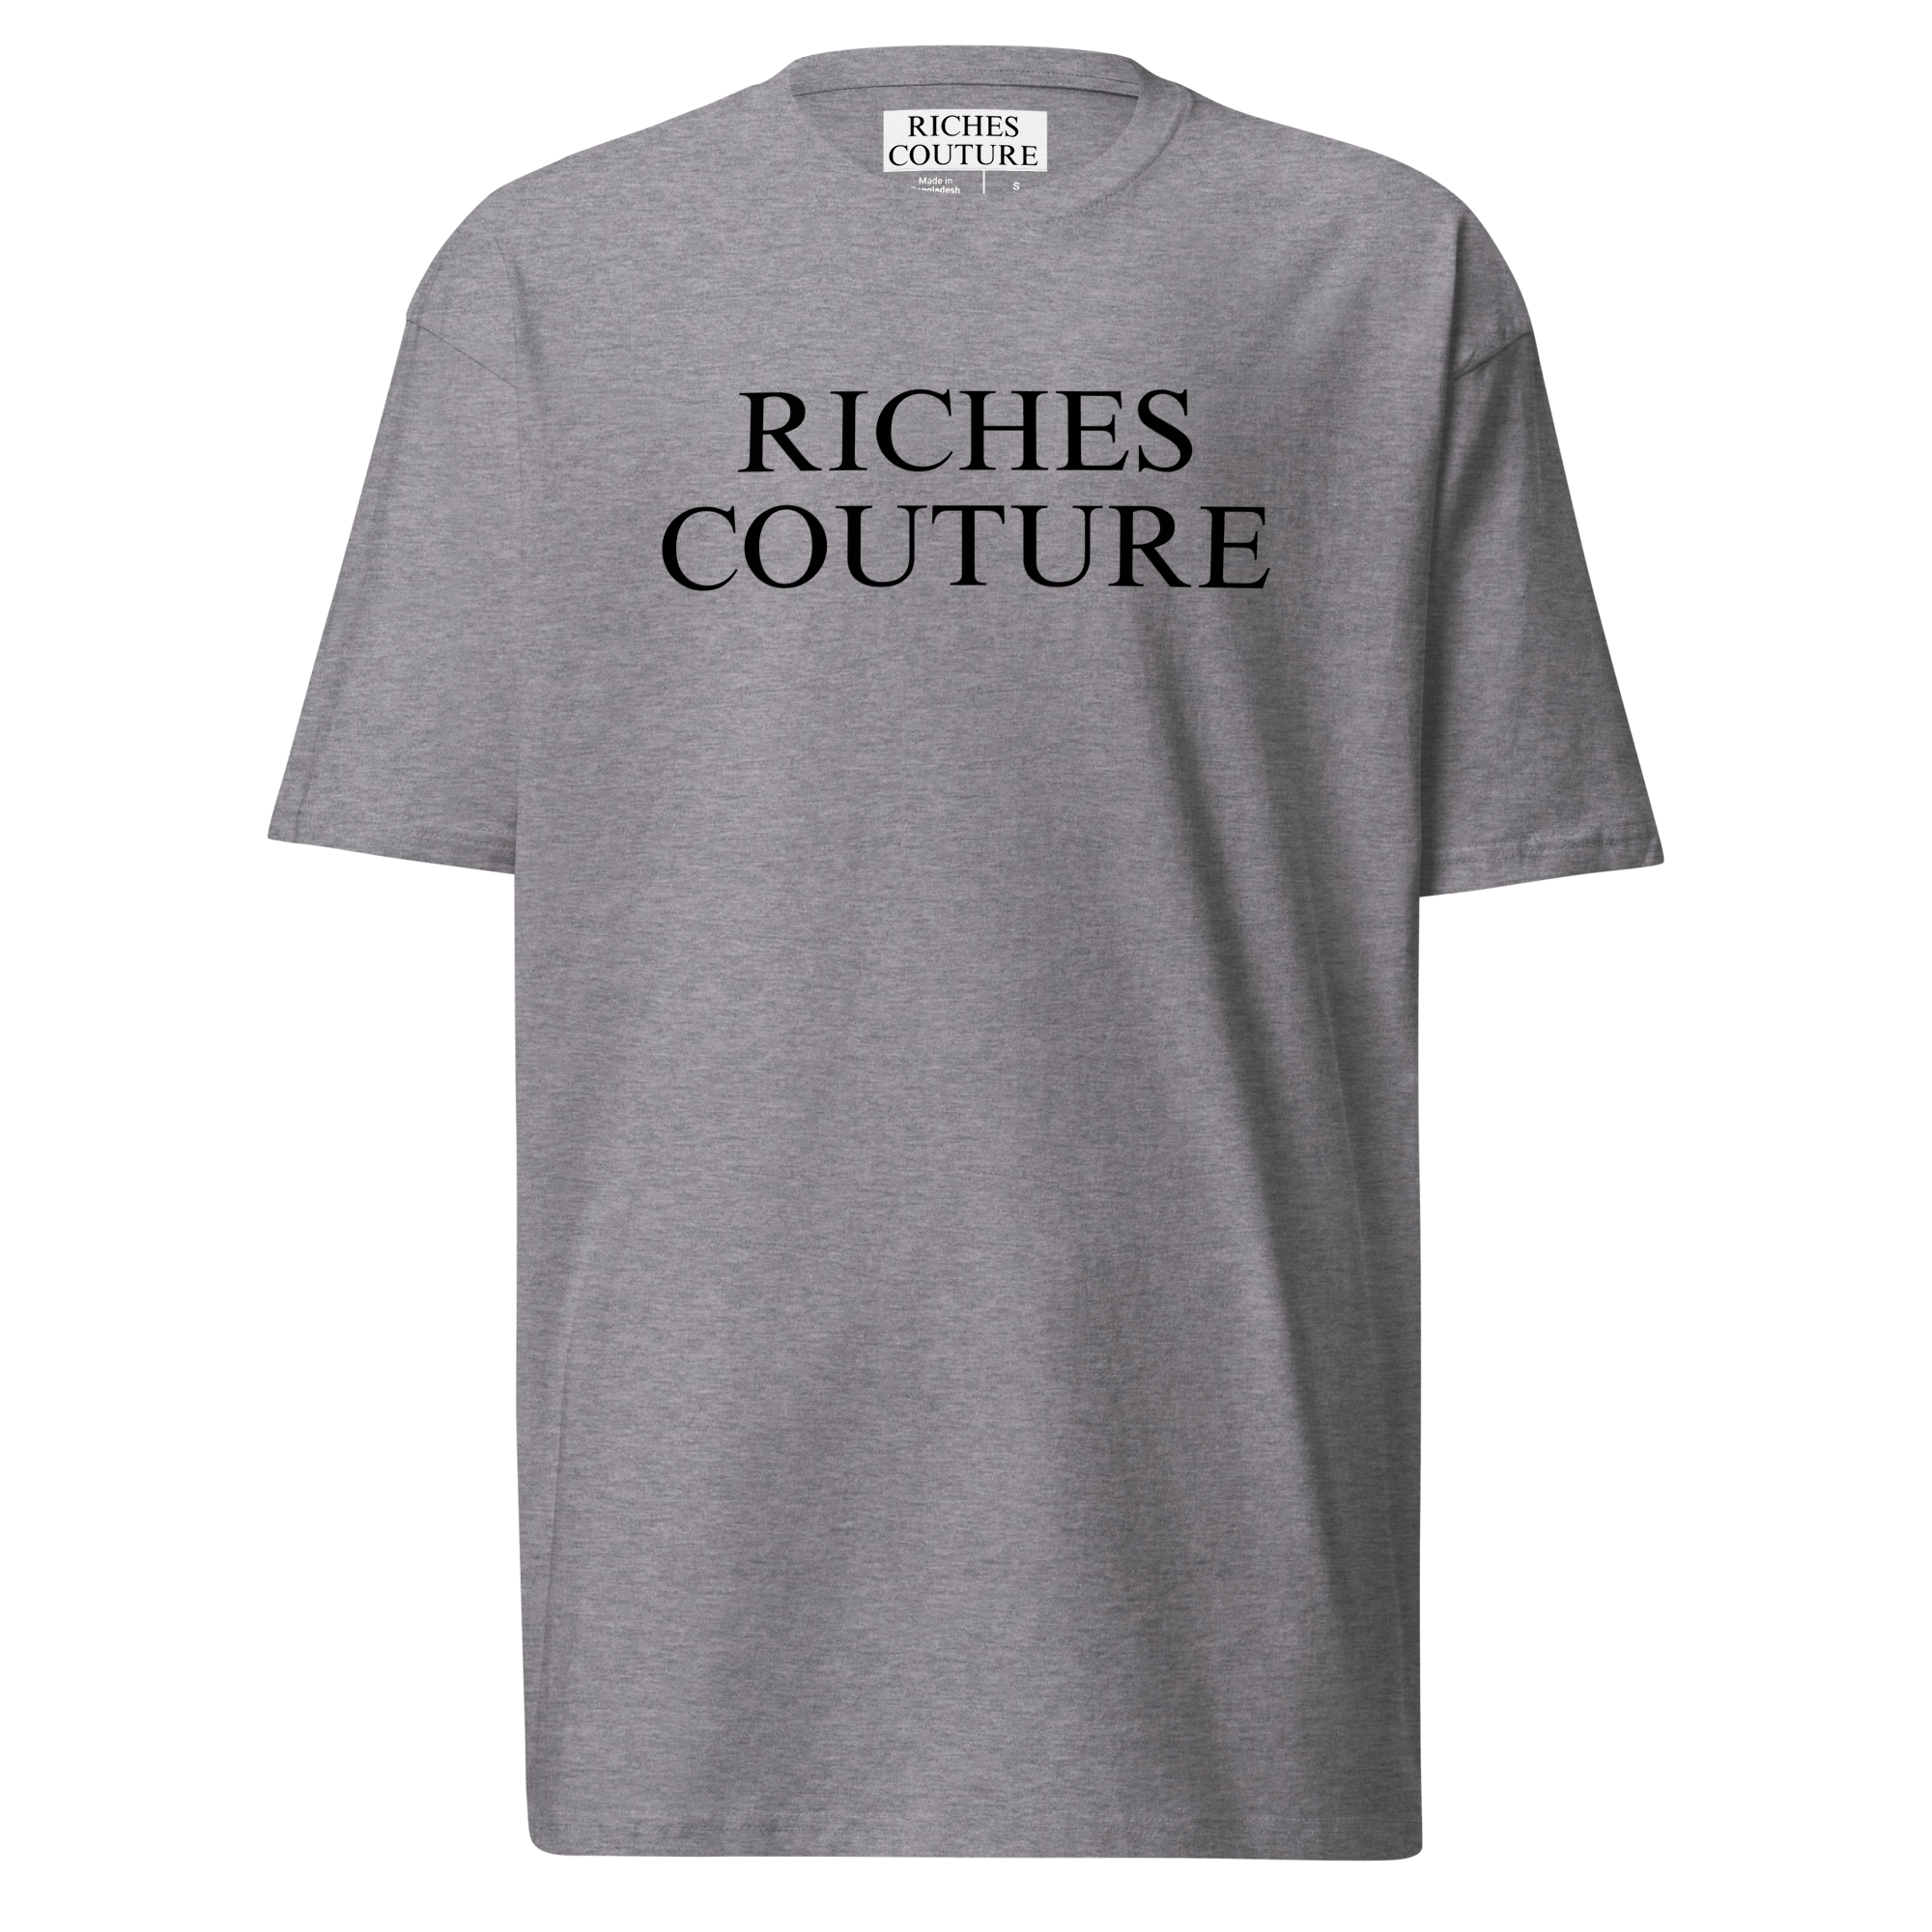  Riches Couture Supreme Heavyweight Men's Tee